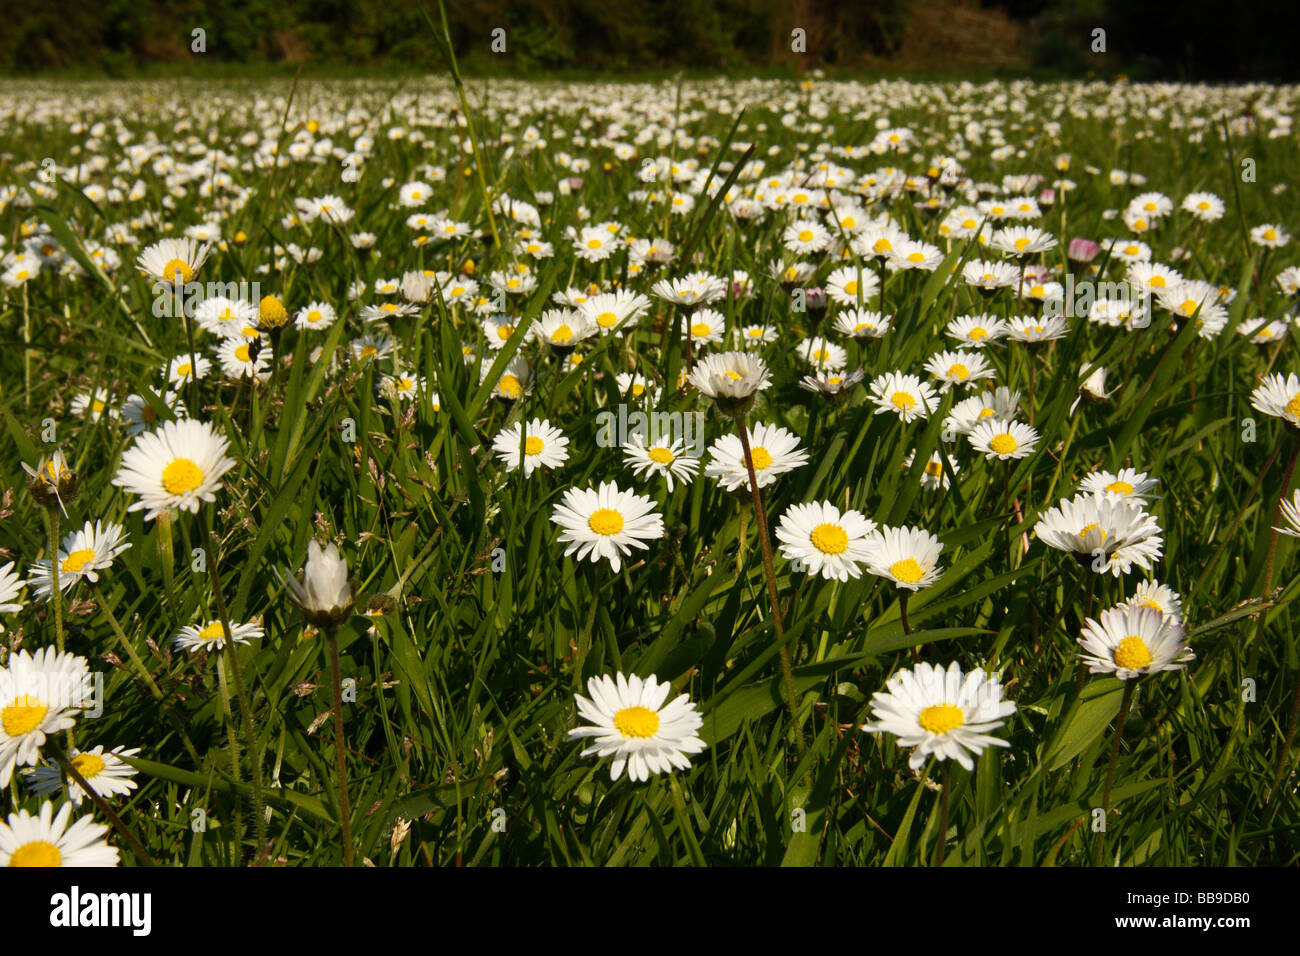 Daisies, Bellis perennis, in a meadow in Spring Stock Photo